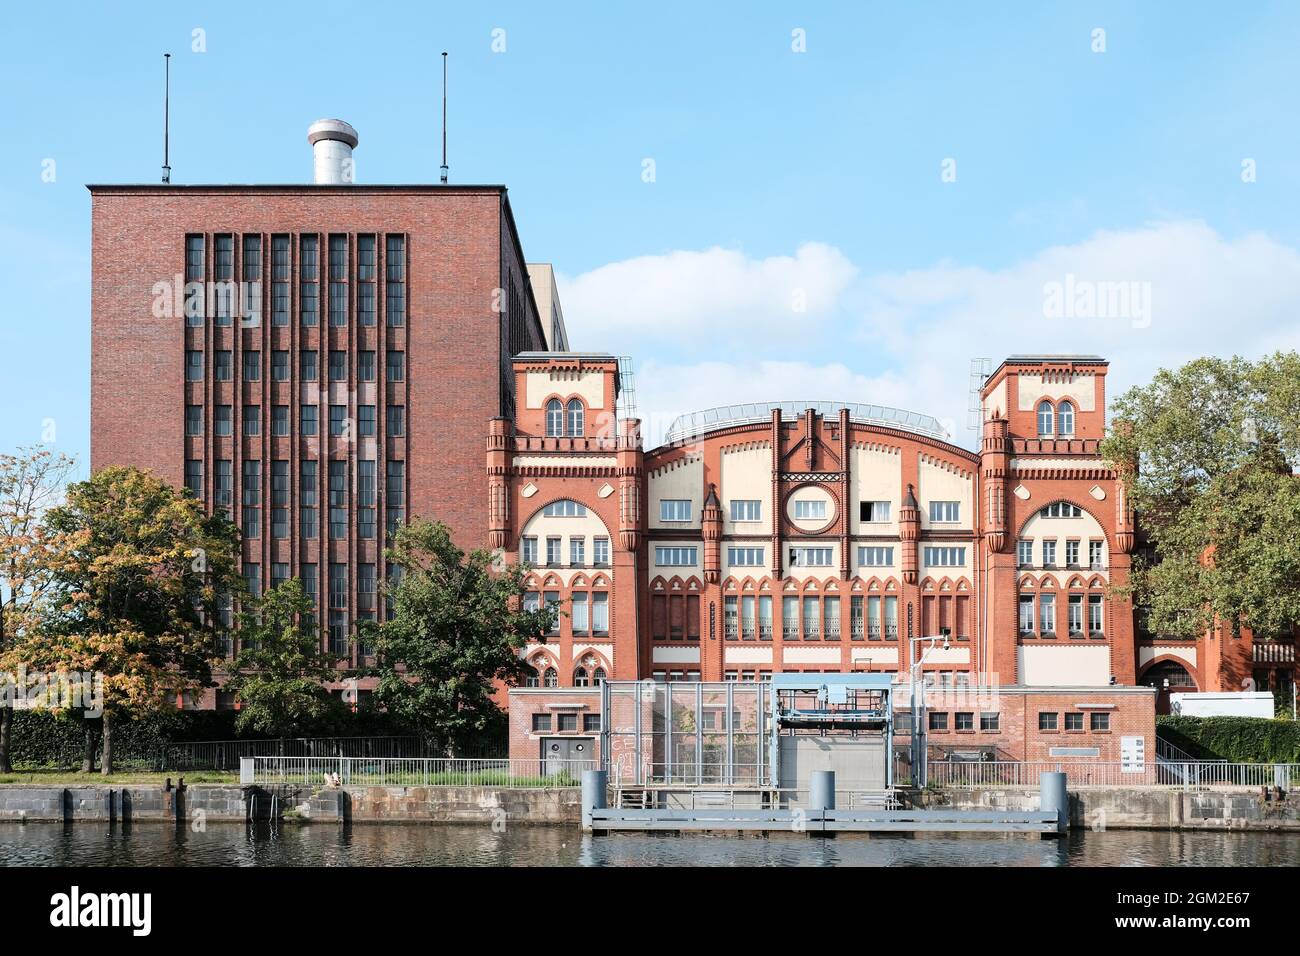 Berlin, Germany, September 7, 2021, view across the Spree River to the historic building of the Charlottenburg combined heat and power plant. Stock Photo